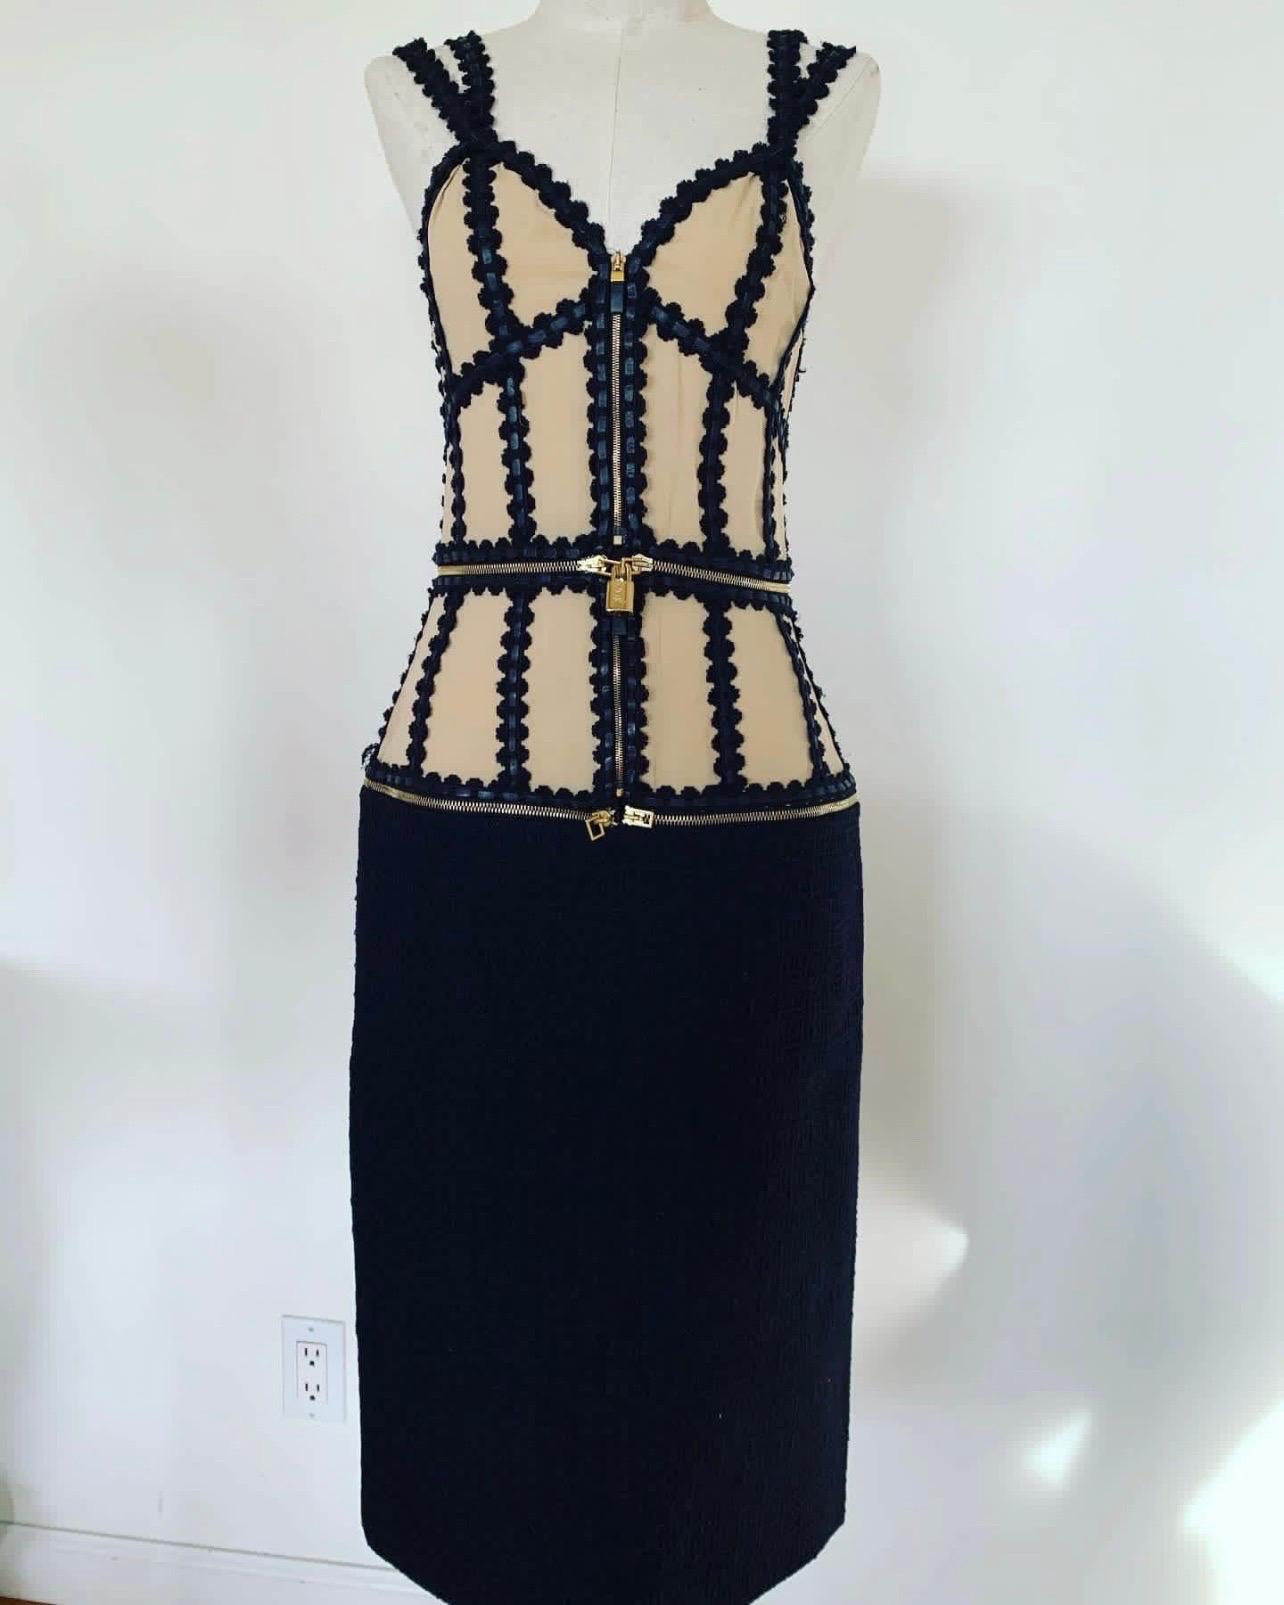 Vintage ALEXANDER MCQUEEN transformer dress. This rare and stunning early 2000s dress transforms from a sheath dress to a tank to a crop top corset style top. 

Leather trim, silk, and wool make this an edgy and delicate combination. Zippers and